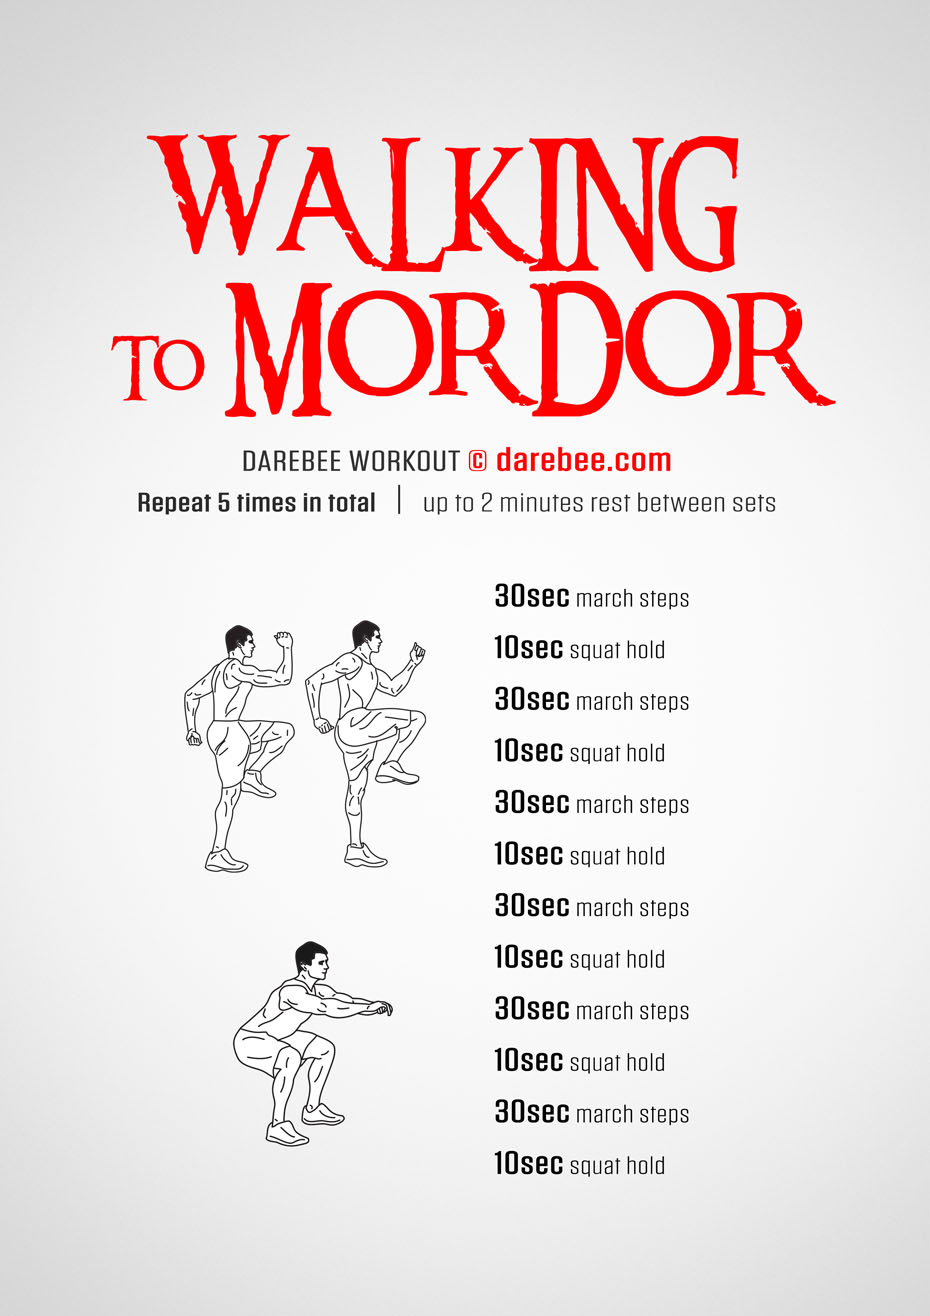 Walking To Mordor is a Darebee home-fitness aerobic and cardiovascular workout that helps you improve your baseline fitness.